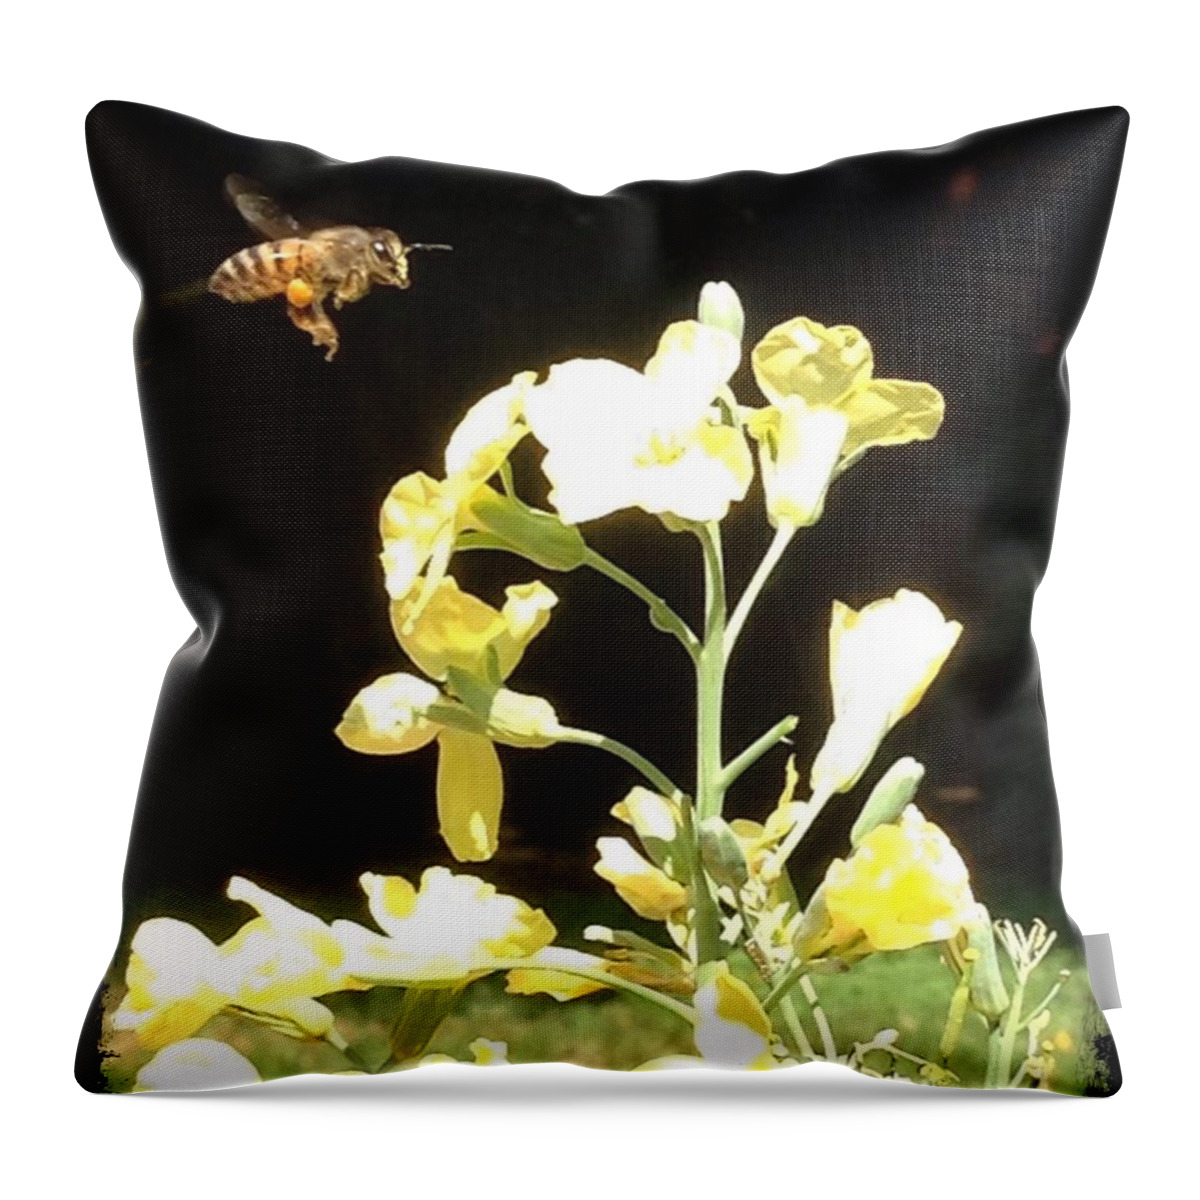 Bees Throw Pillow featuring the photograph Bees Love Broccoli by Daniele Smith